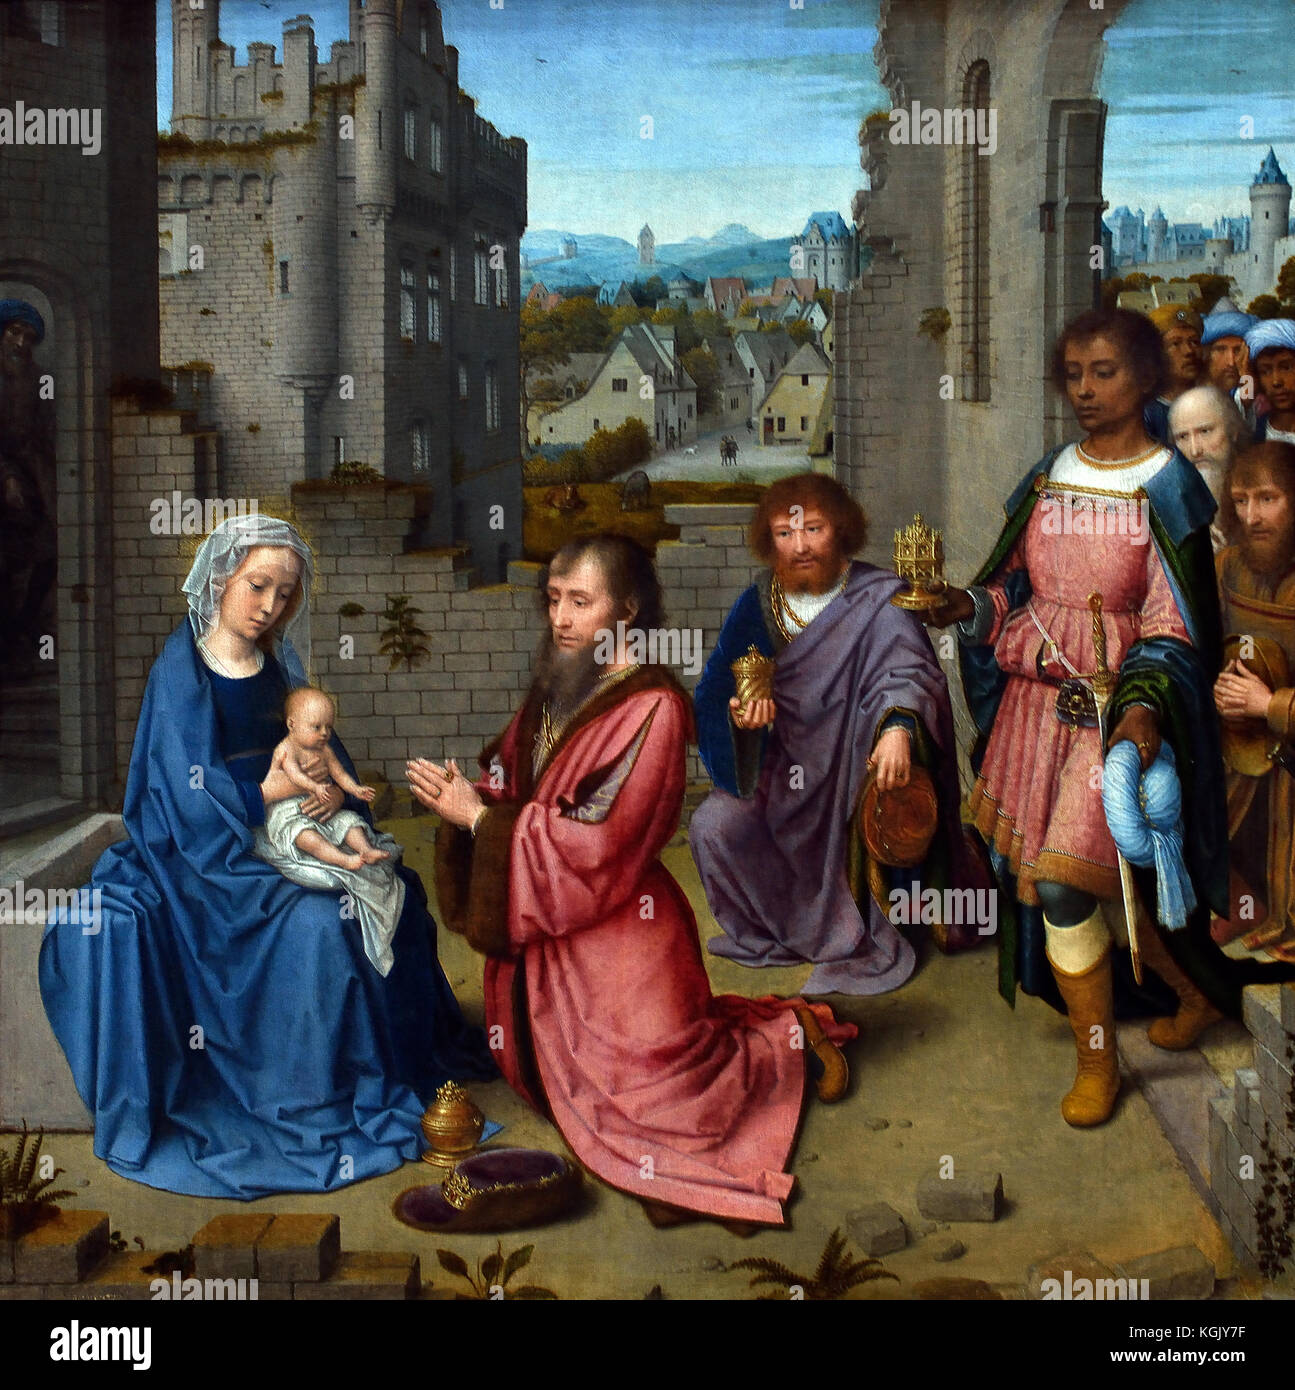 Adoration of the Kings from Two Panels from an Altarpiece 1515 Gerard David  1460 – 1523 Early Netherlandish painter and manuscript illuminator known for his brilliant use of color ( The Netherlands, Dutch, Belgian, Belgium, Flemish ) Stock Photo